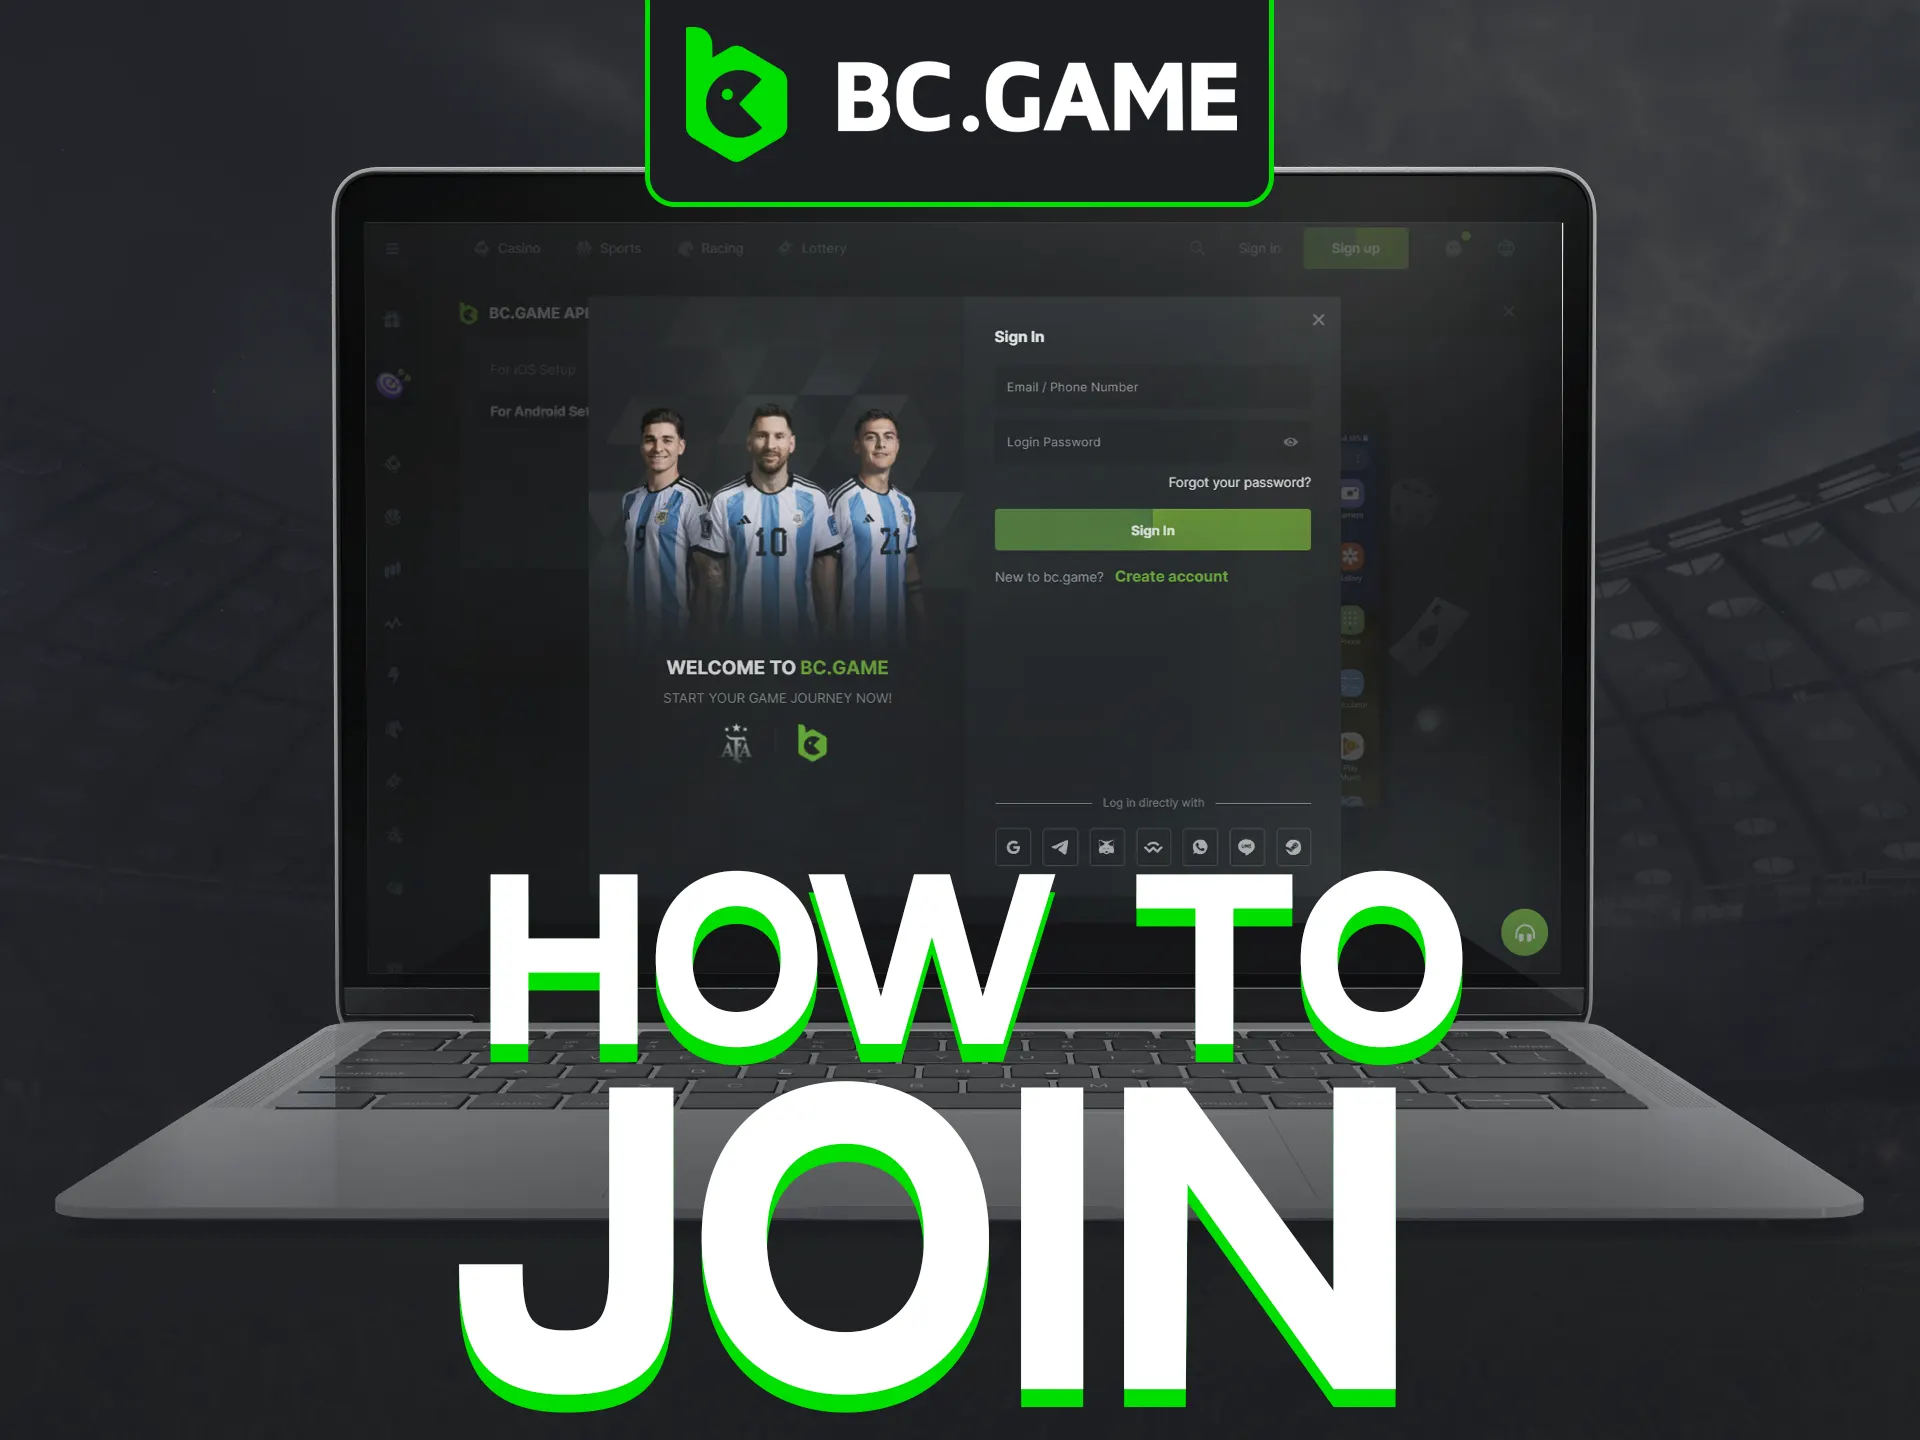 Join BC Game, sign up, create account, enjoy gaming.